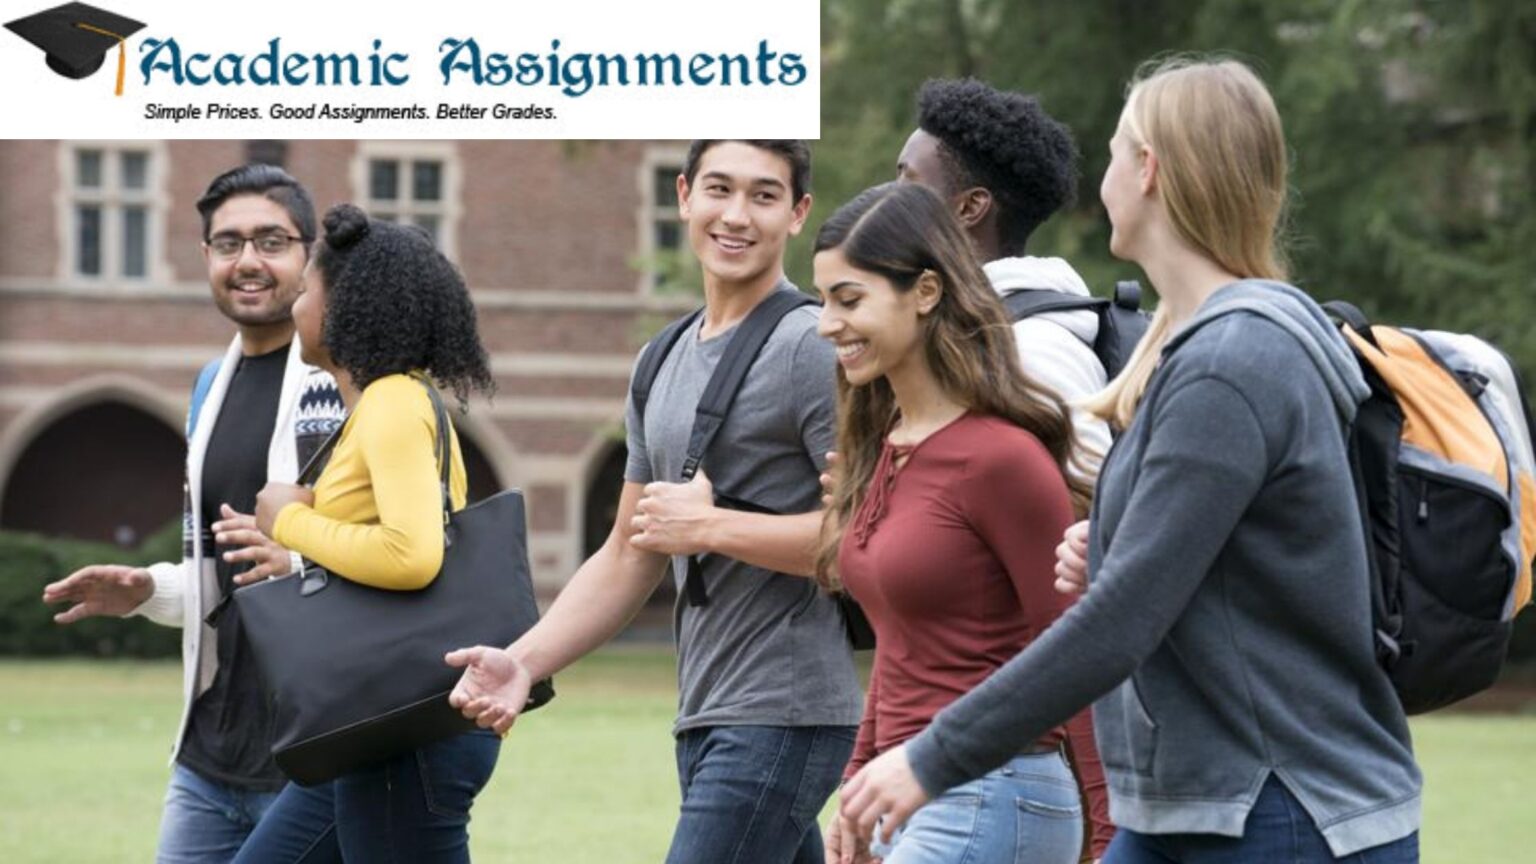 assistance with university assignments